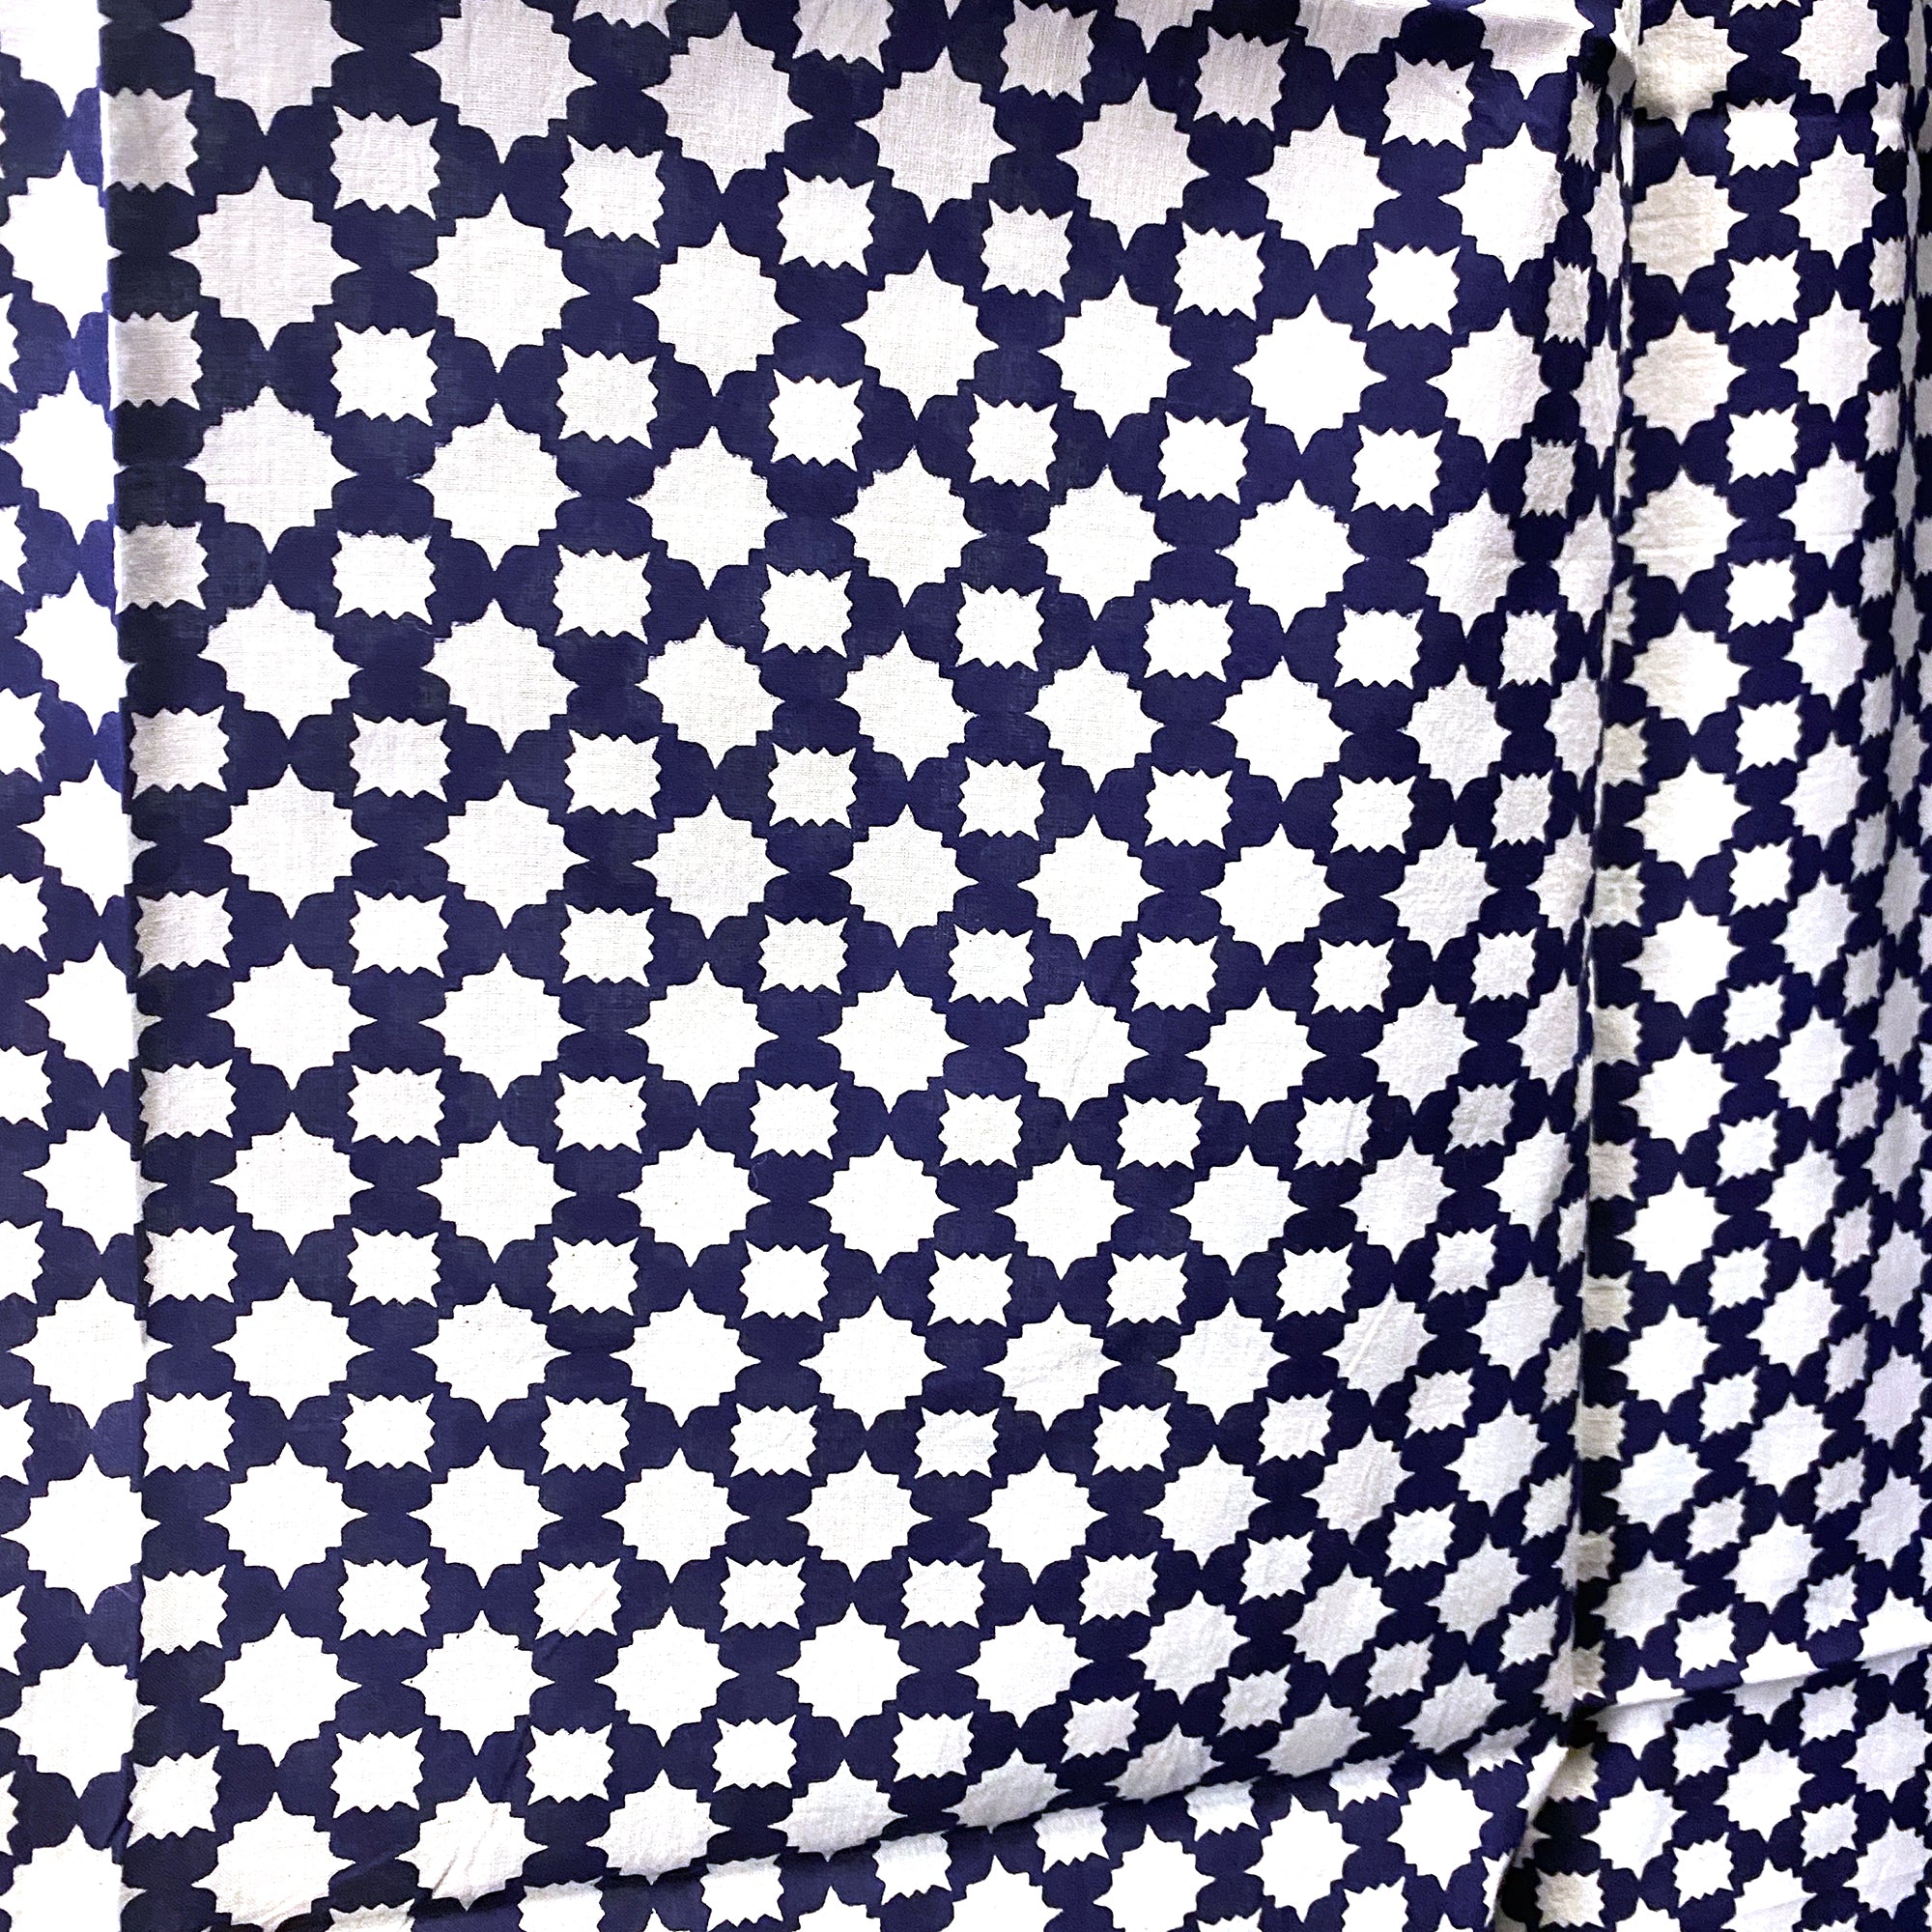 Navy & White Cotton Curtain Pair-5 Patterns - Vintage India NYC